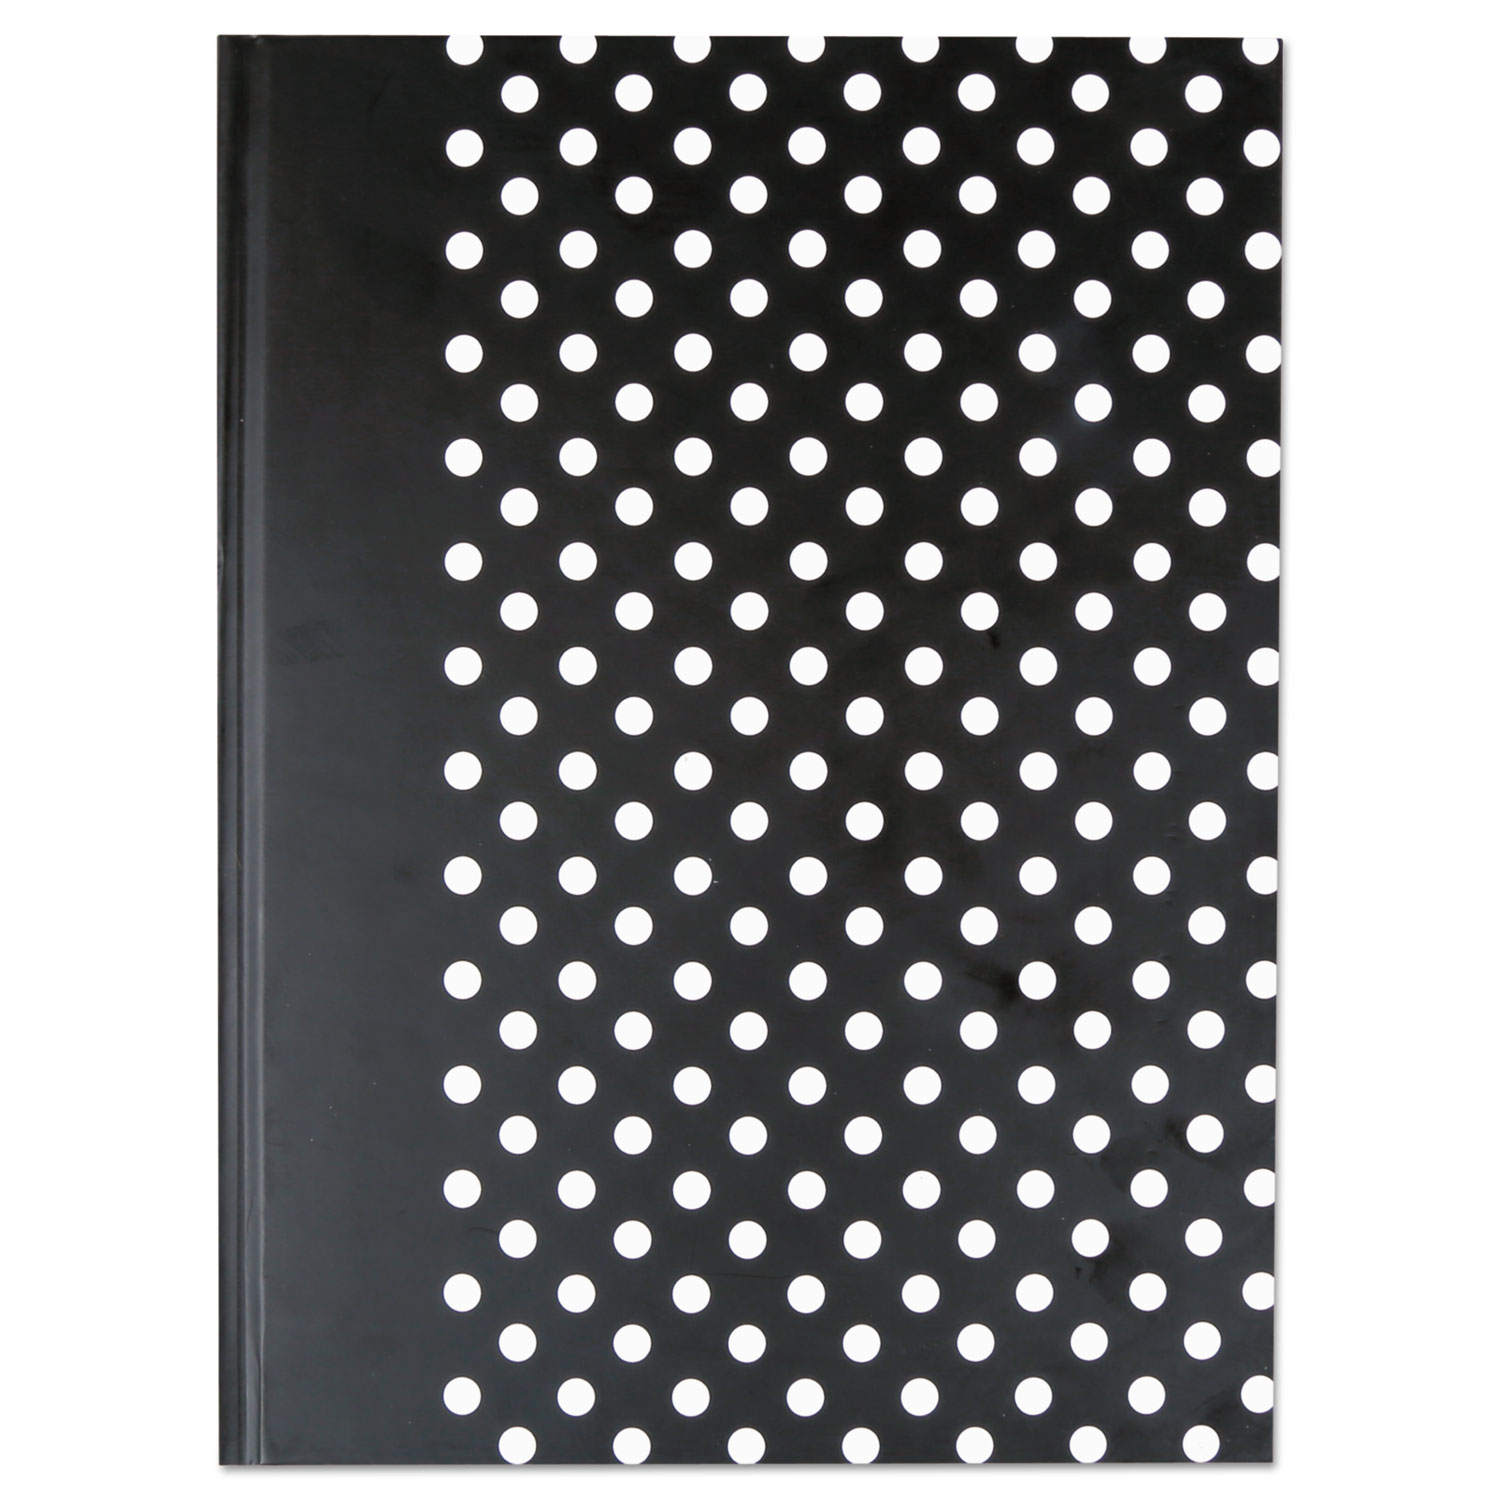  Universal UNV66350 Casebound Hardcover Notebook, Wide/Legal Rule, Black/White Dots, 10.25 x 7.68, 150 Sheets (UNV66350) 